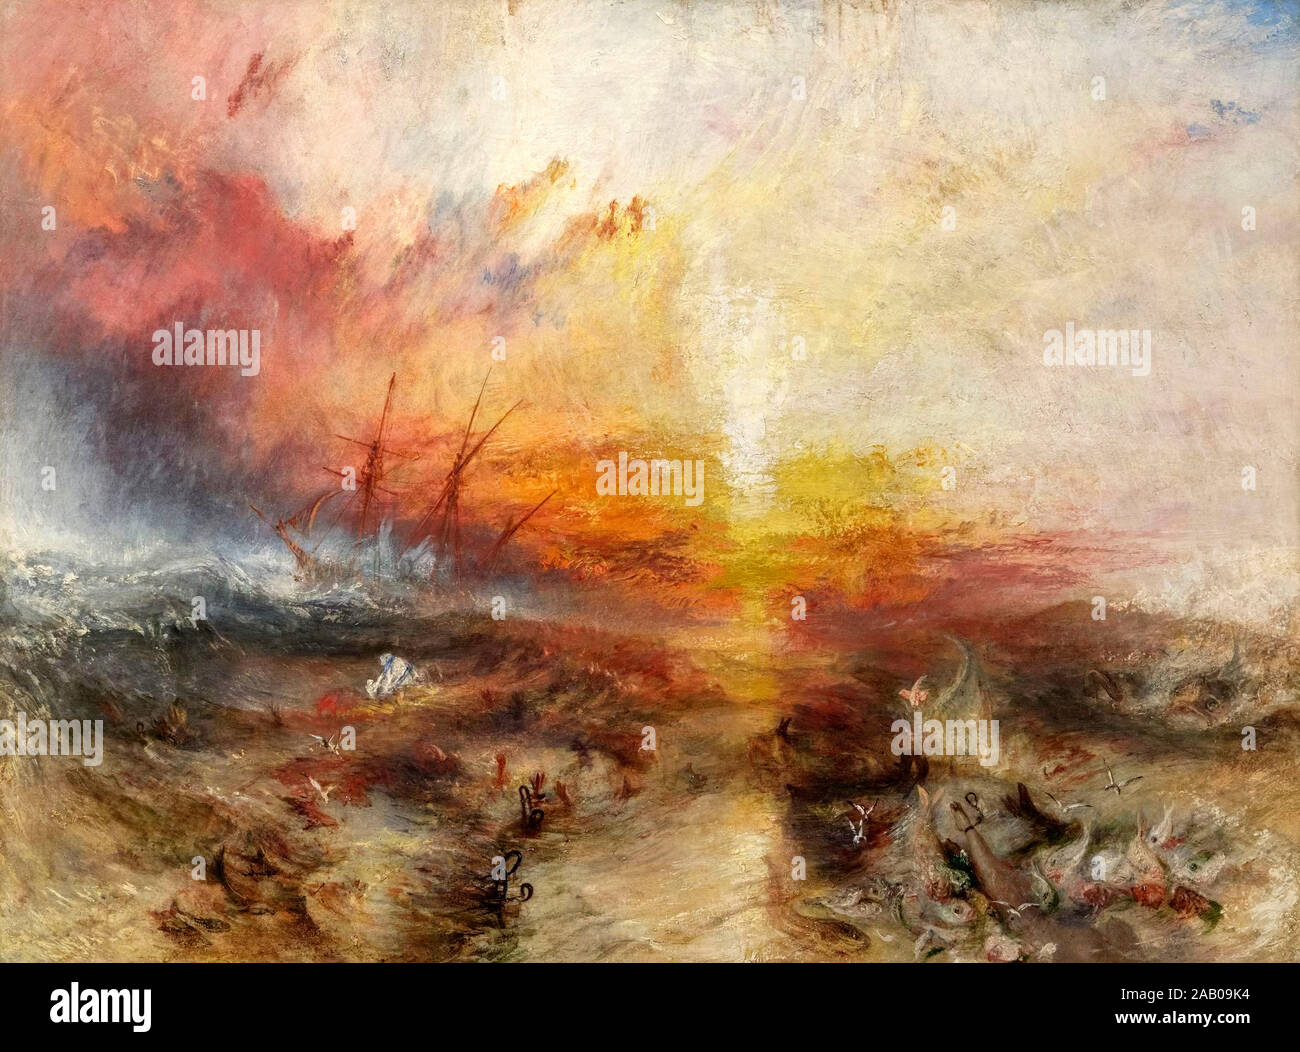 JMW Turner painting. Slave Ship (Slavers Throwing Overboard the Dead and Dying, Typhoon Coming On) by JMW Turner (1775-1851), oil on canvas, 1840 Stock Photo